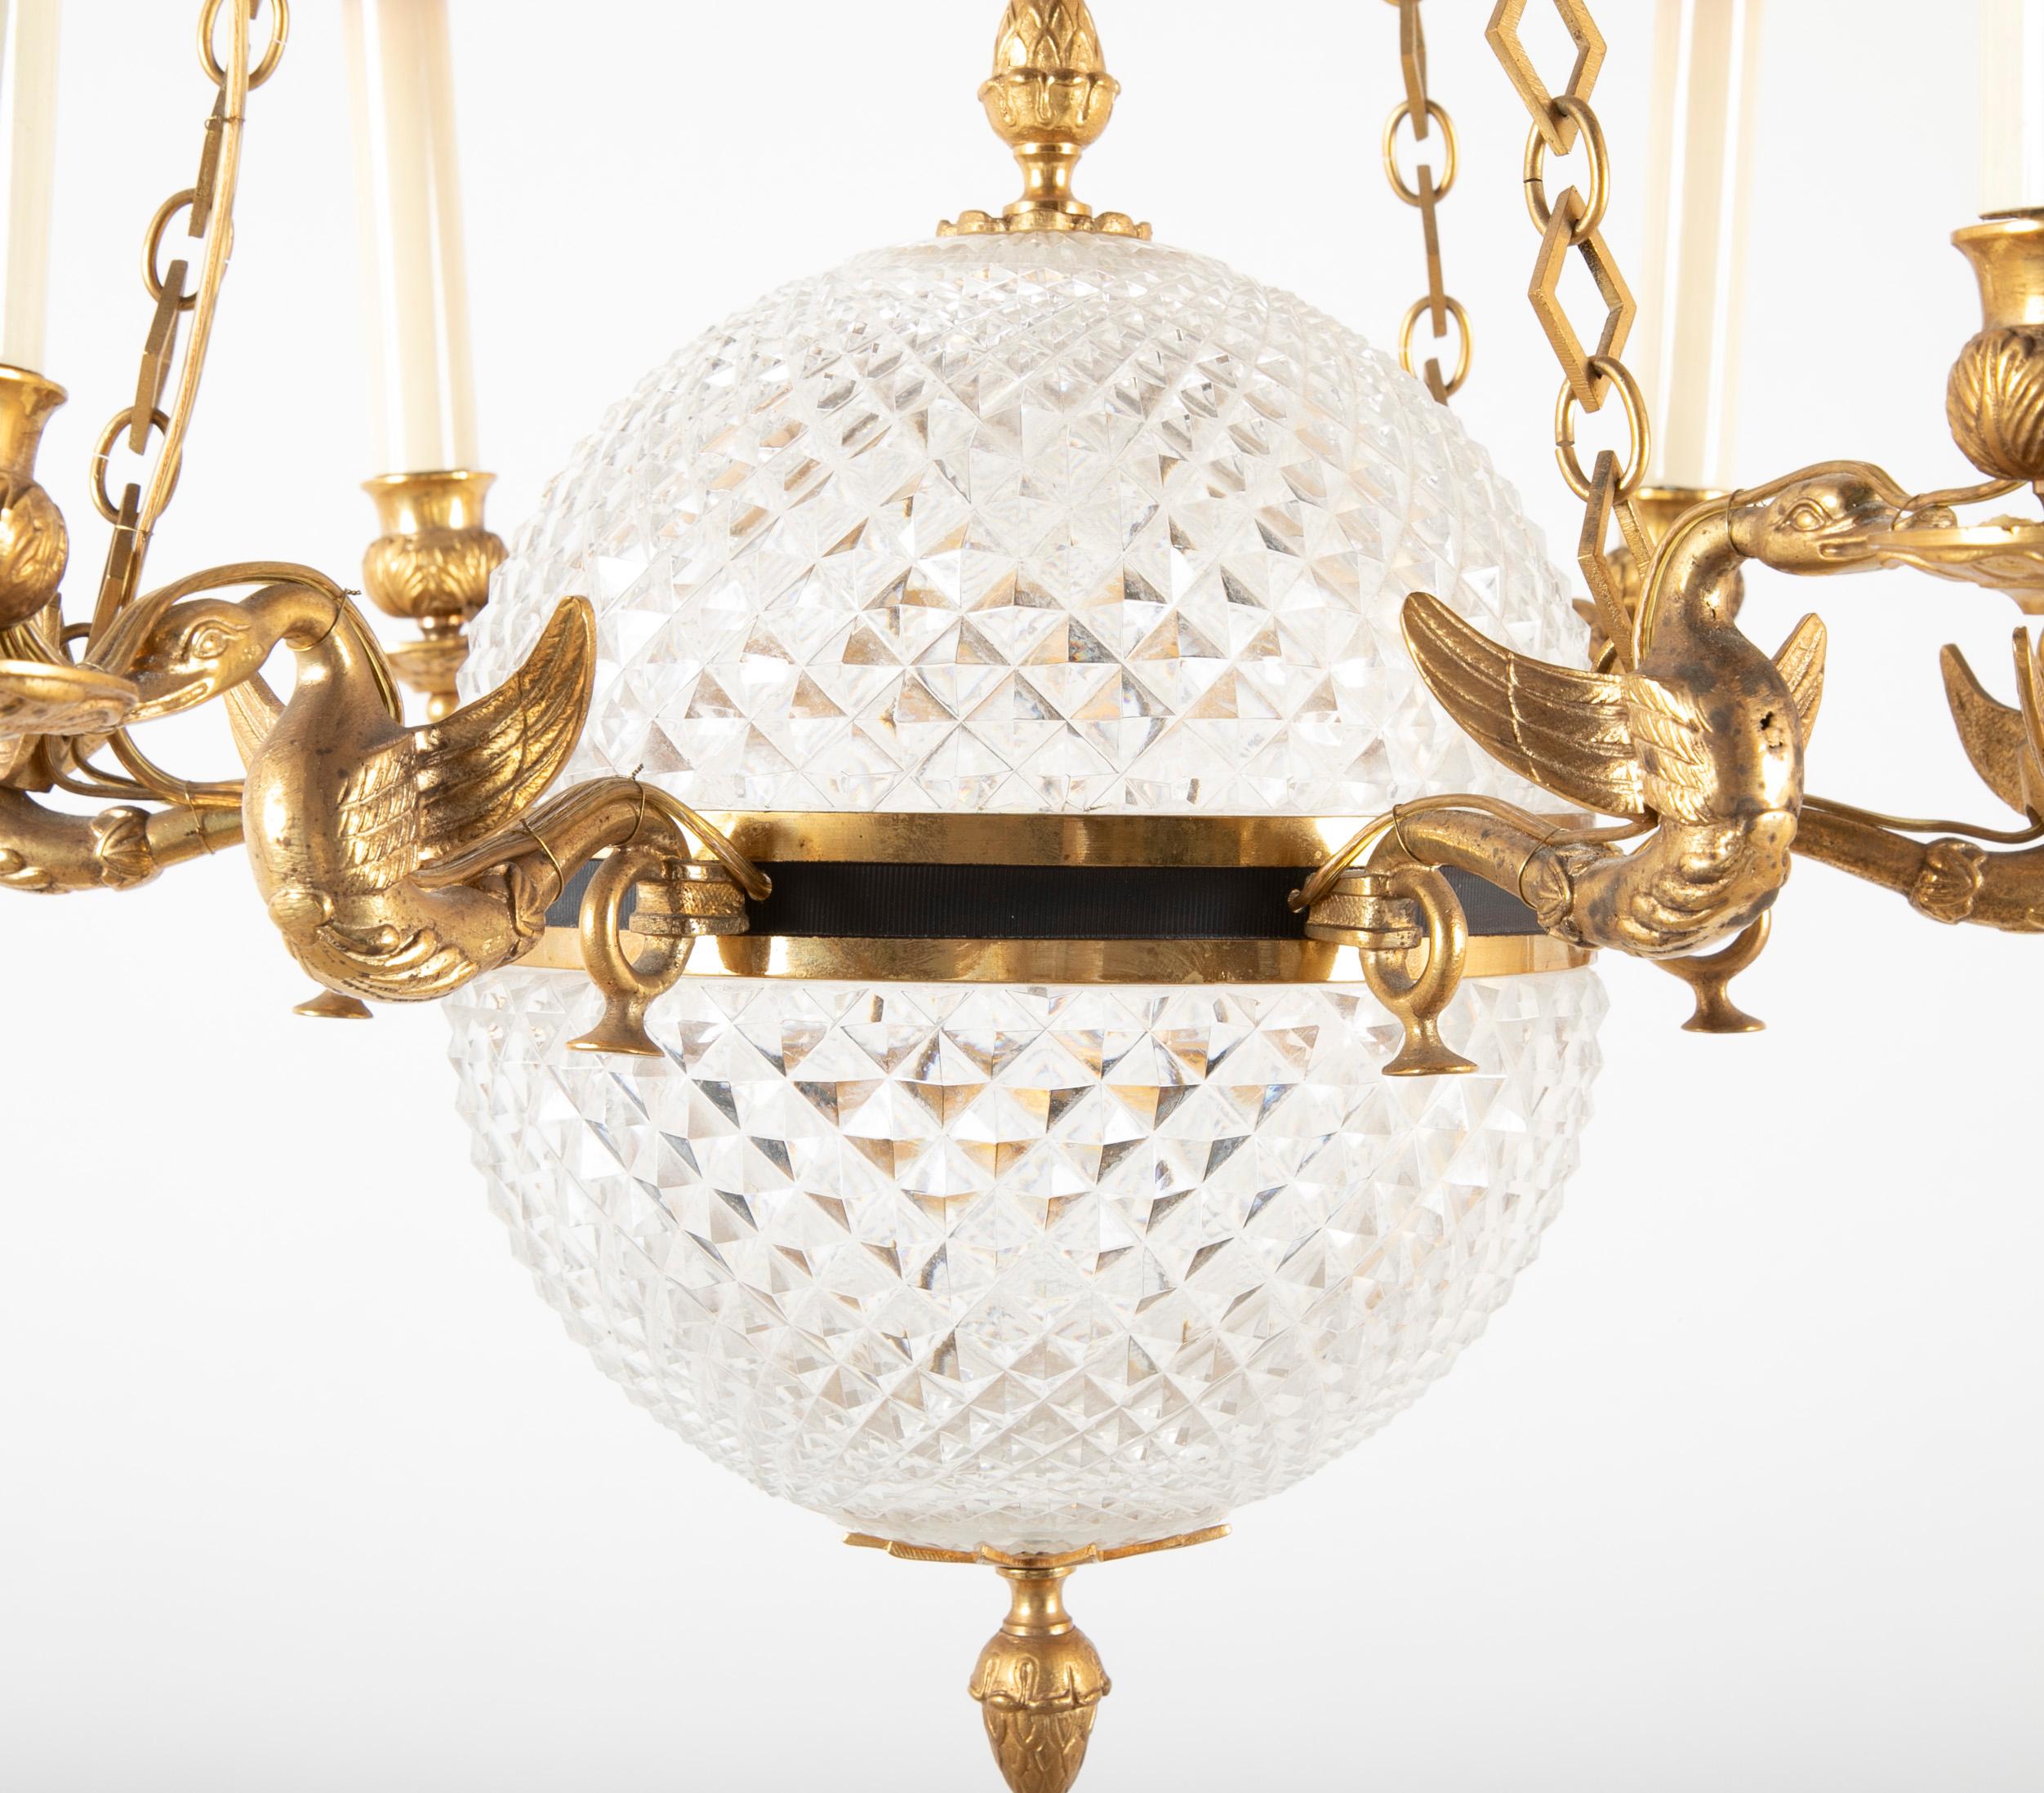 Cut Crystal Chandelier with Central Globe, Swan Arms and Elaborate Crown 8